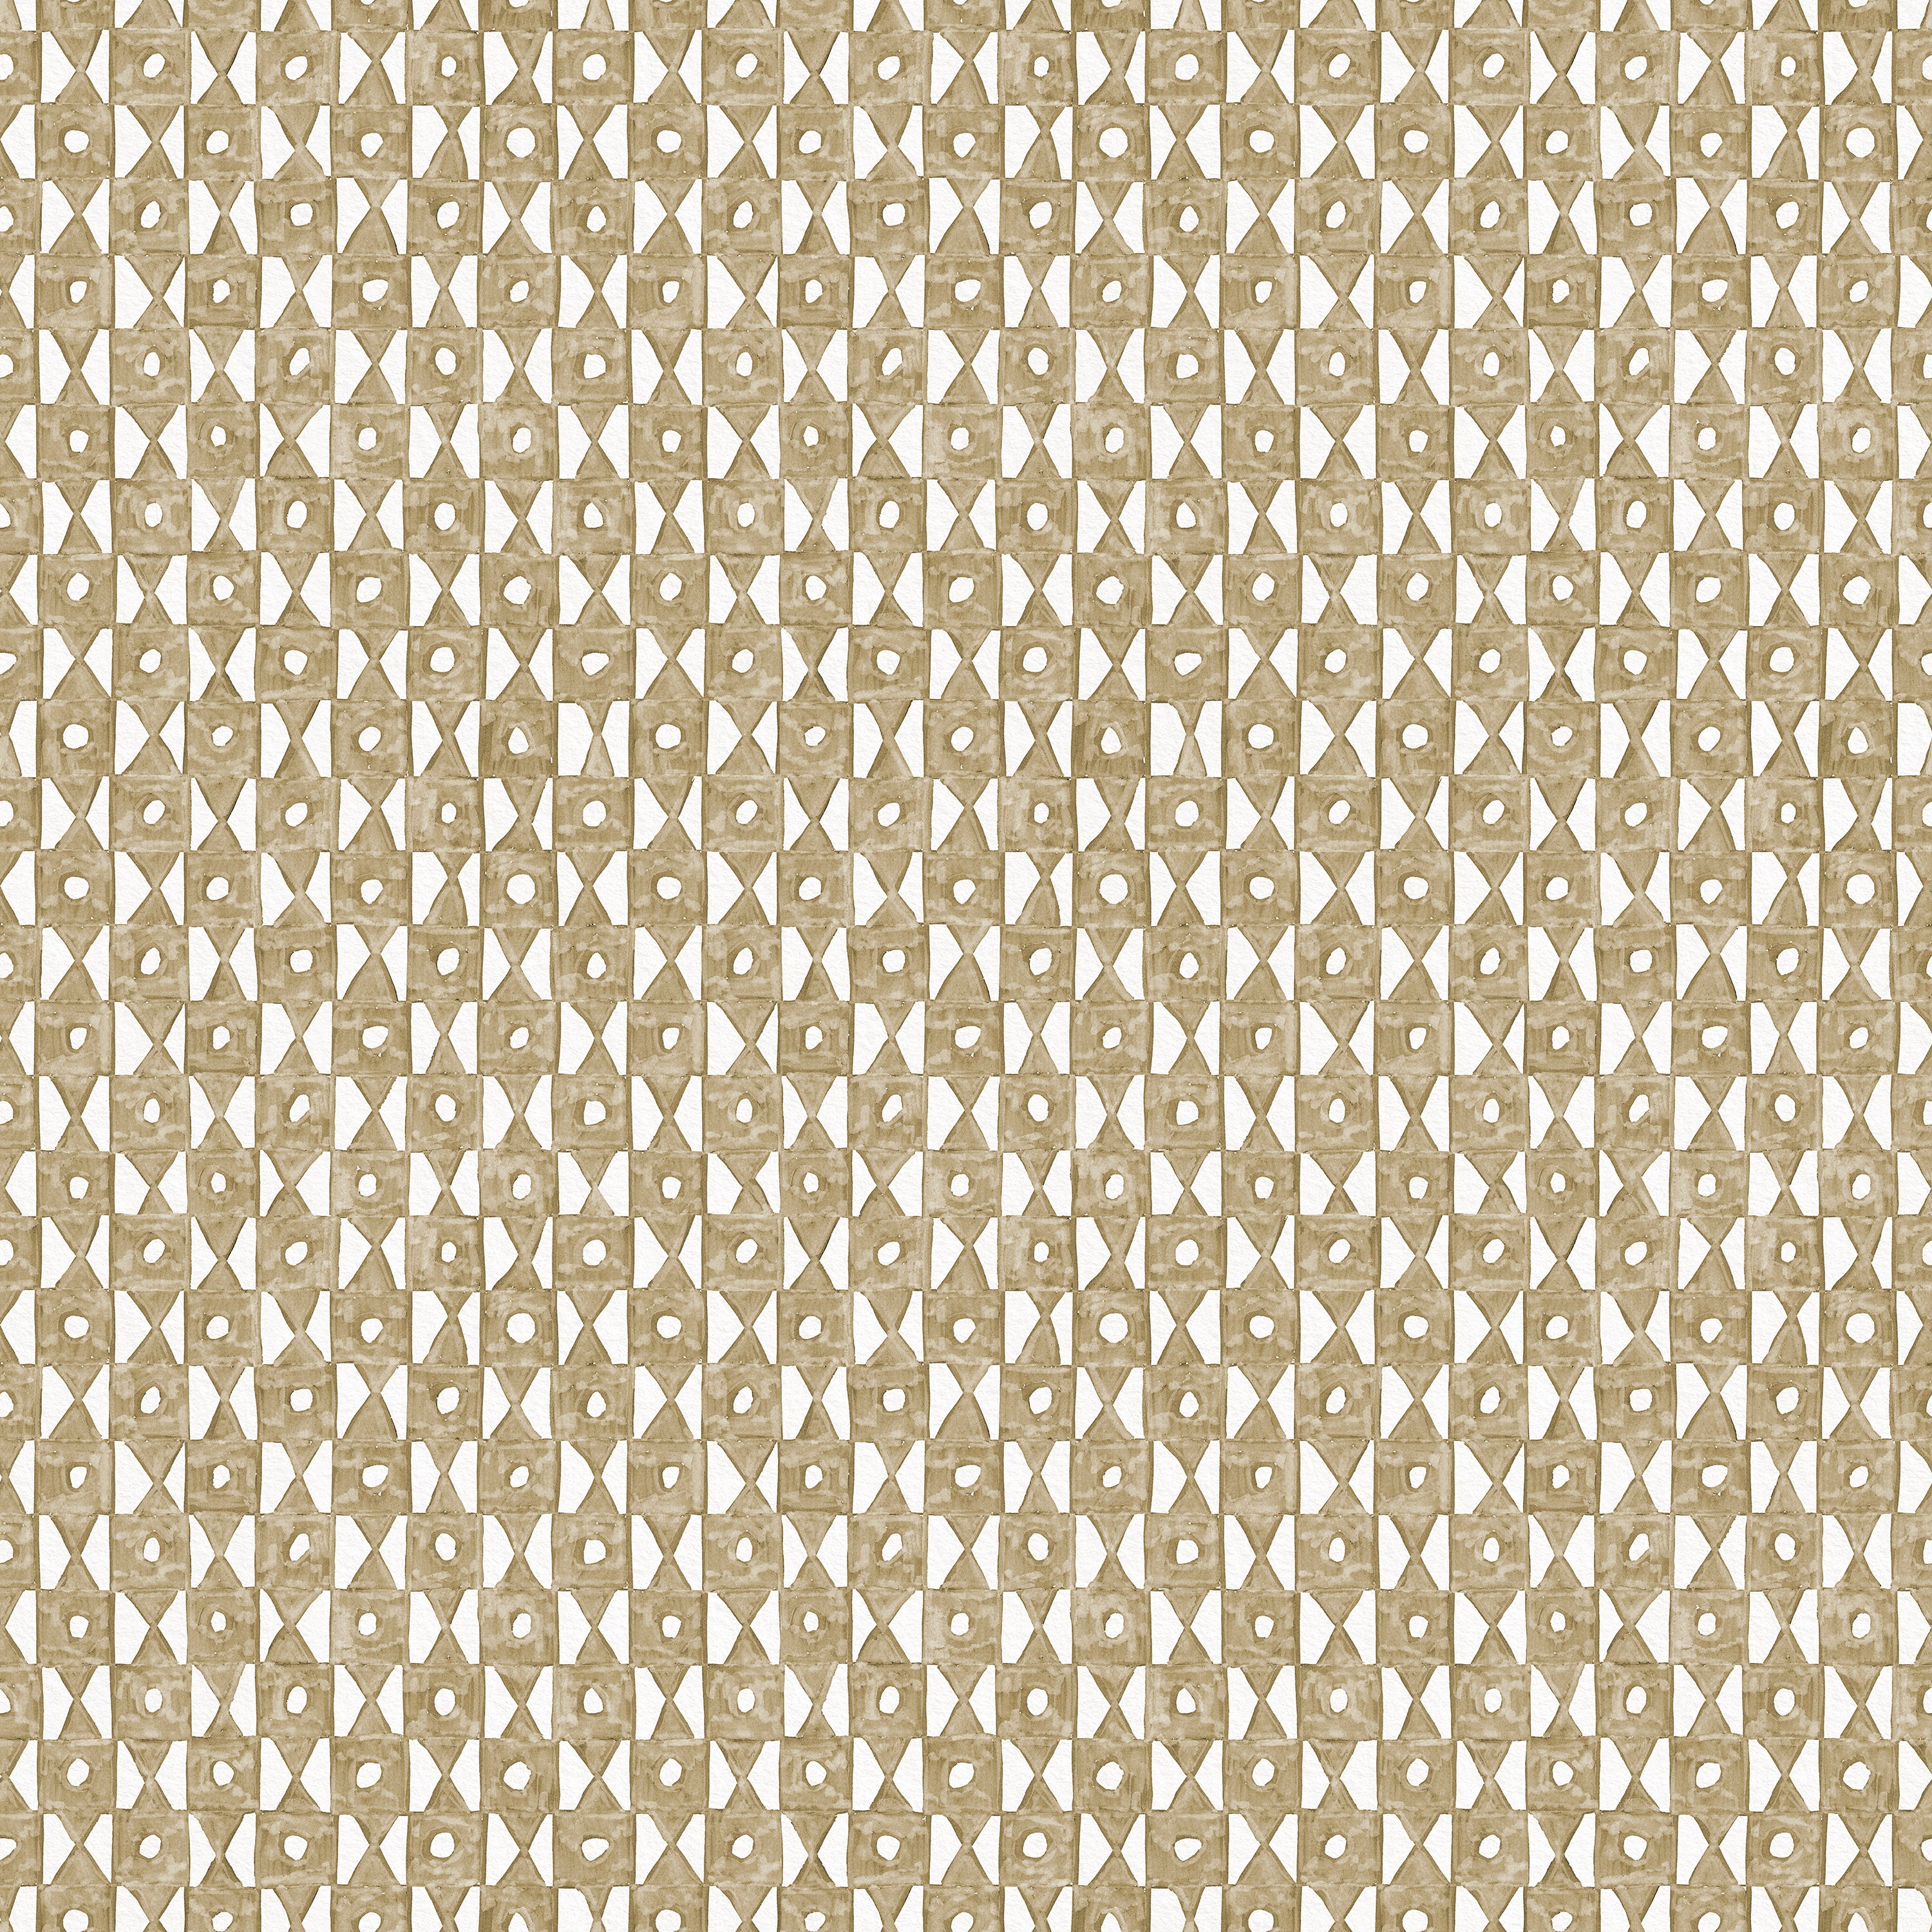 Detail of wallpaper in a geometric grid print in brown on a white field.